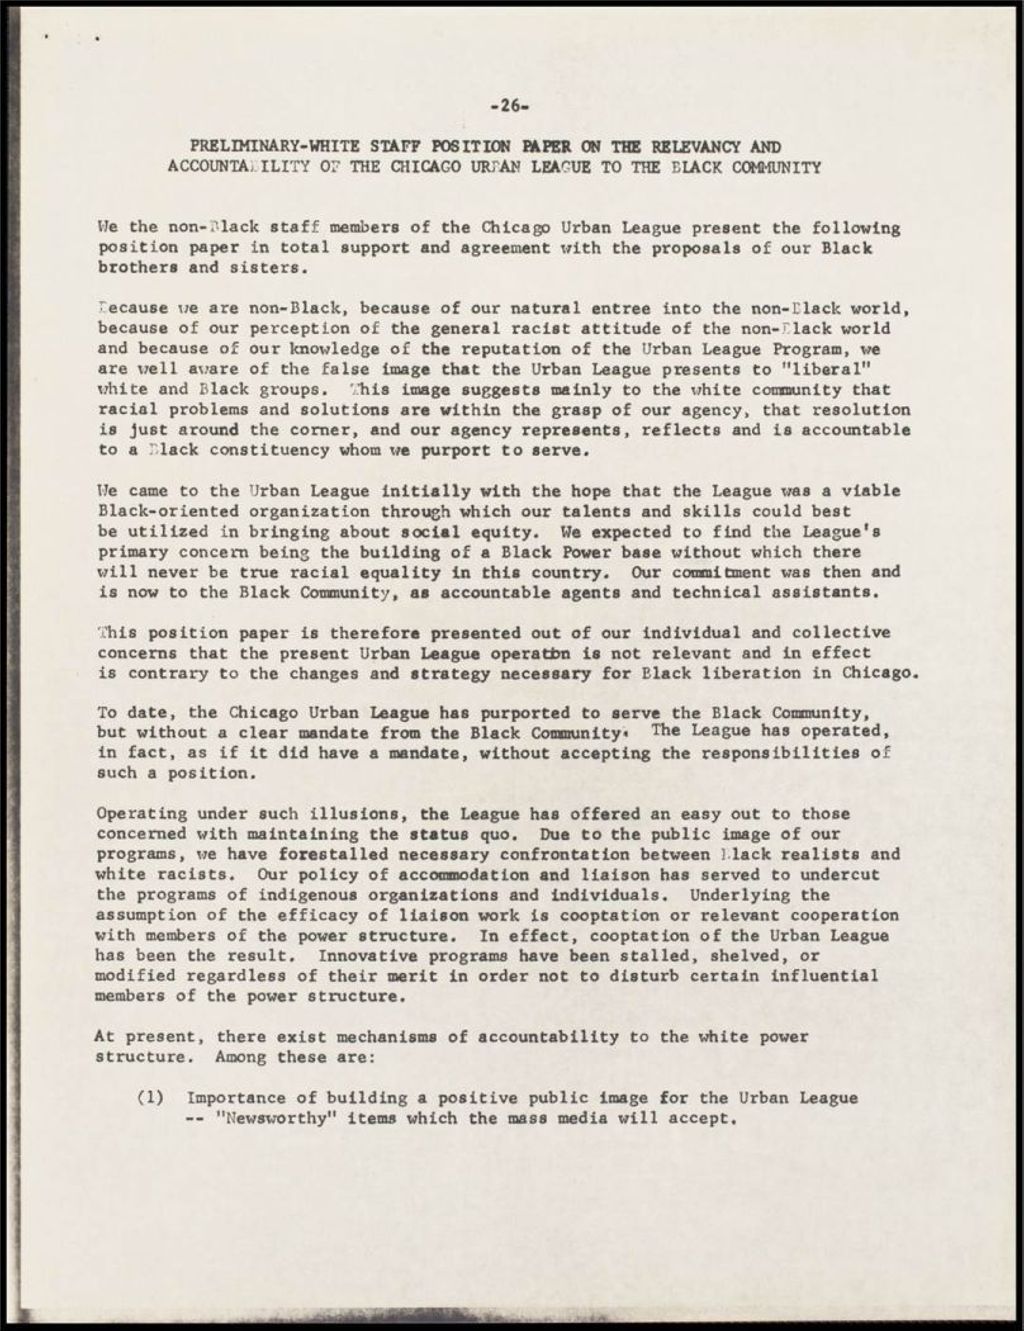 Relevancy and Accountability of the CUL to the Black Community, 1968 (Folder III-2483)